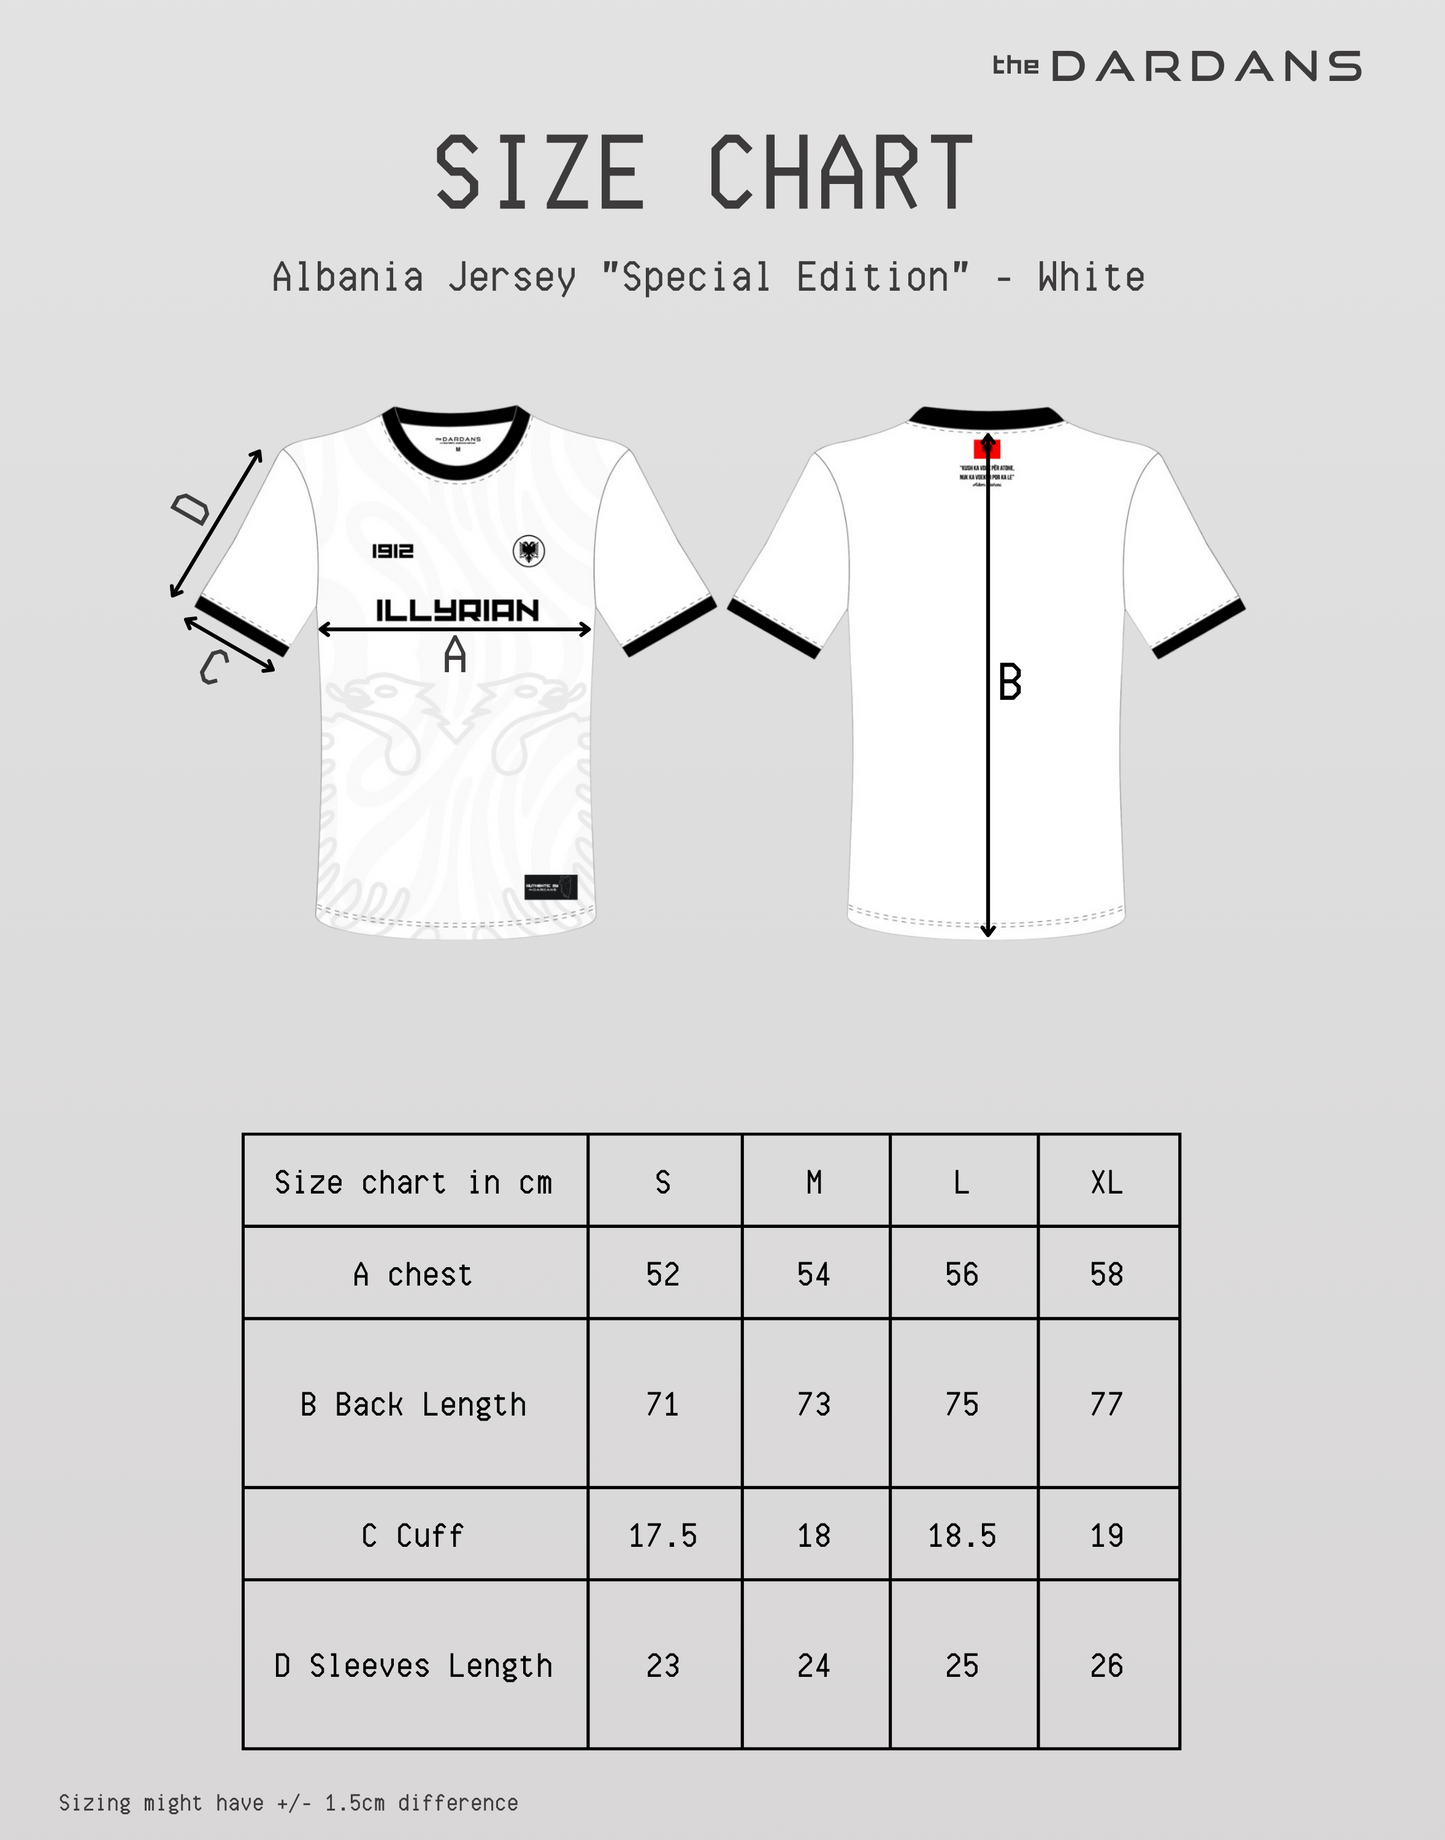 Albania Jersey "Special Edition" - White